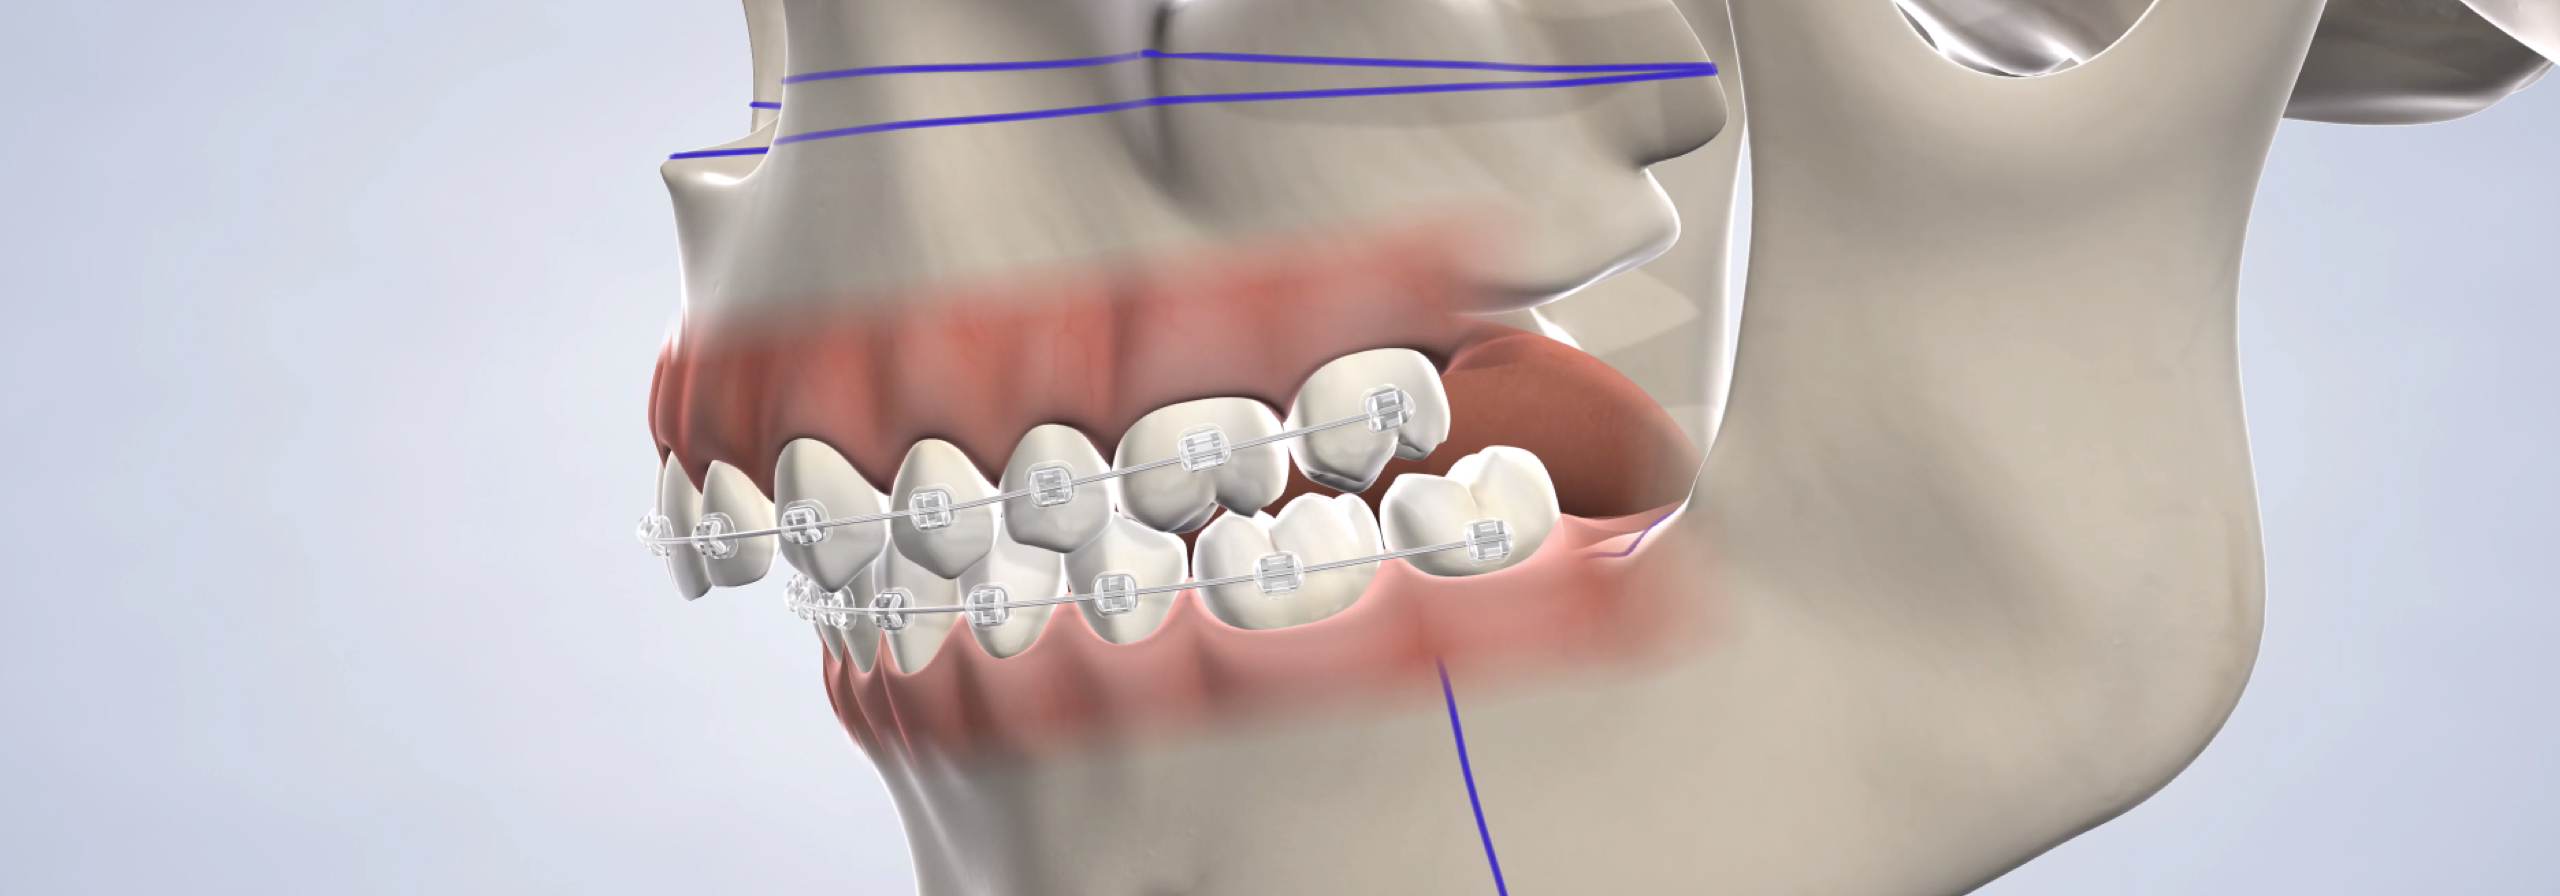 Corrective jaw surgery inLouisville and Mt. Washington, KY, and Jeffersonville, IN